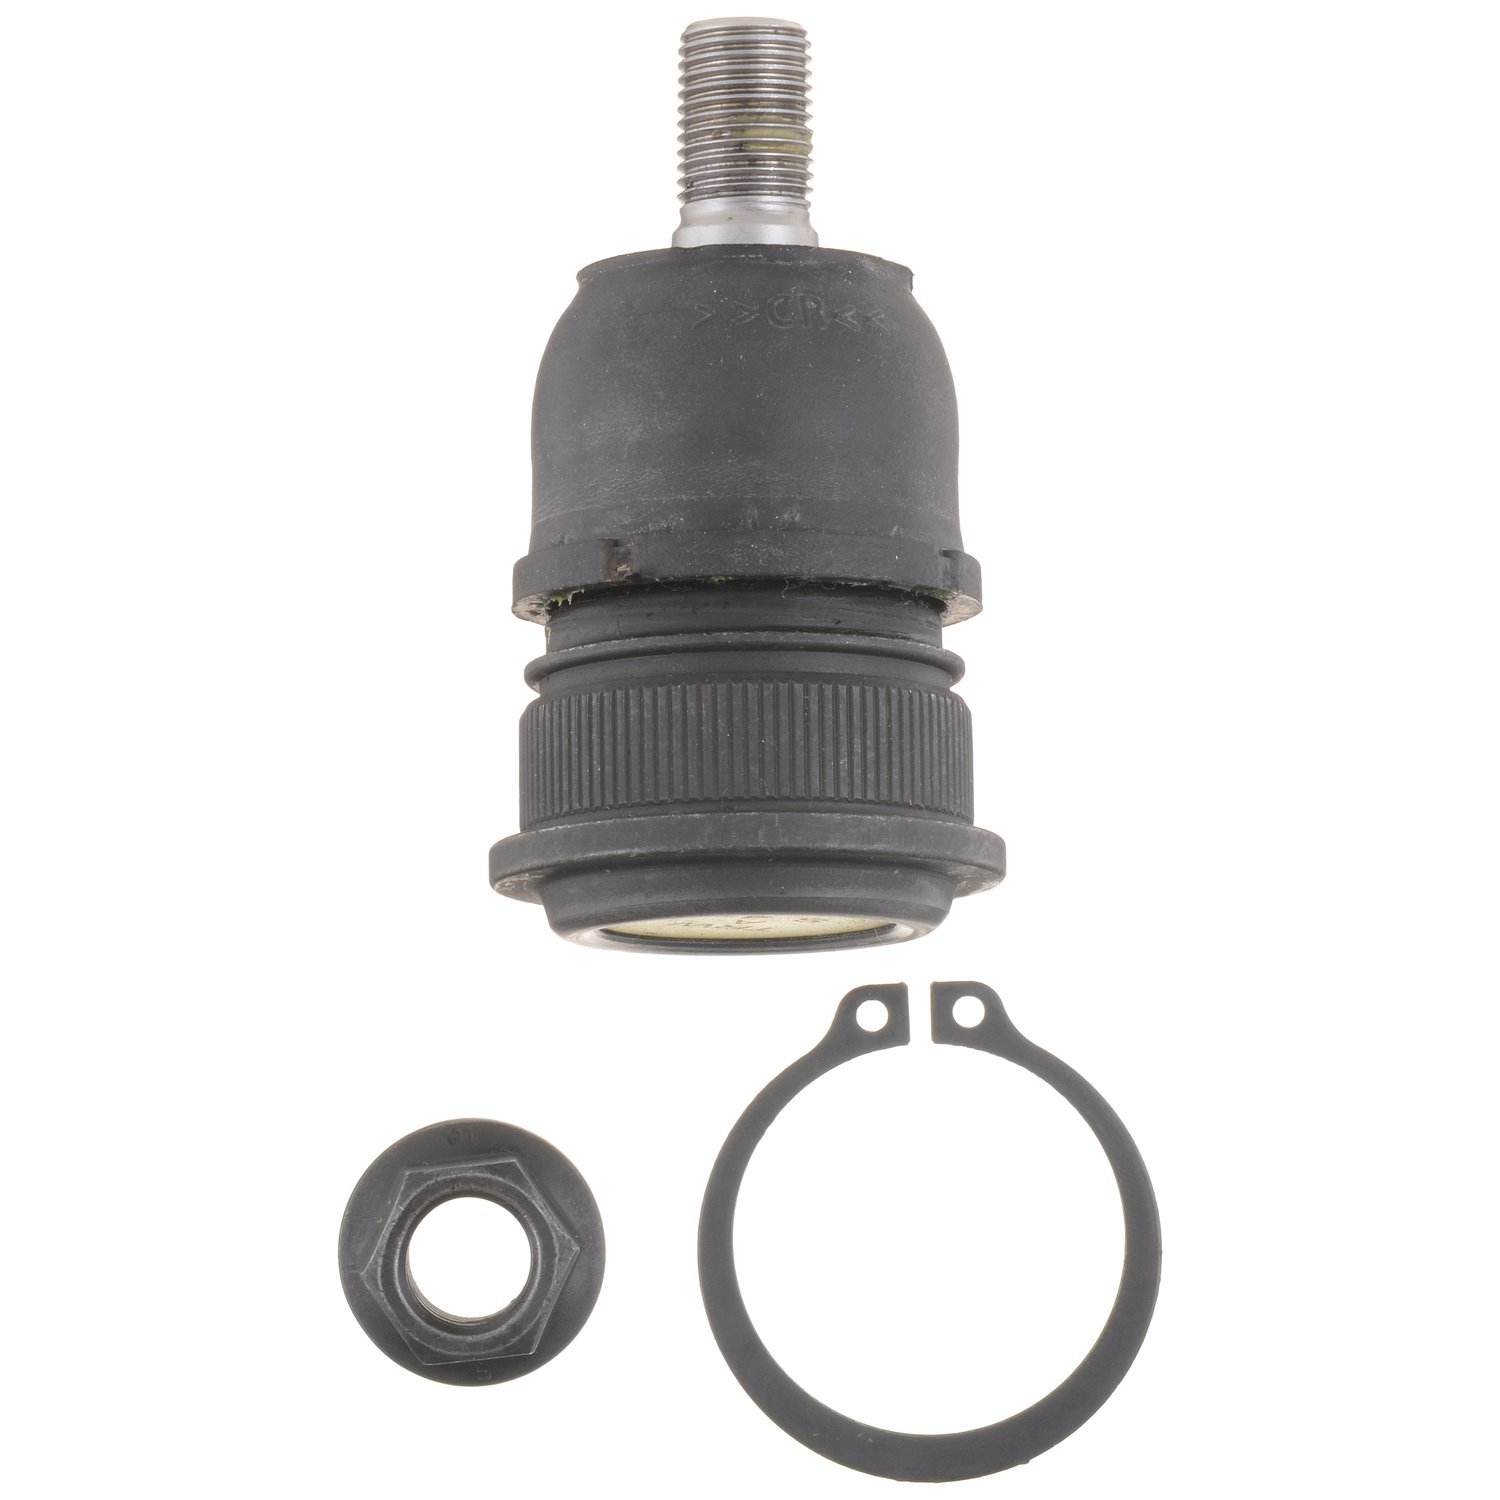 JBJ577 Ball Joint Fits Select Ford Models, Position: Left/Driver or Right/Passenger, Front Upper